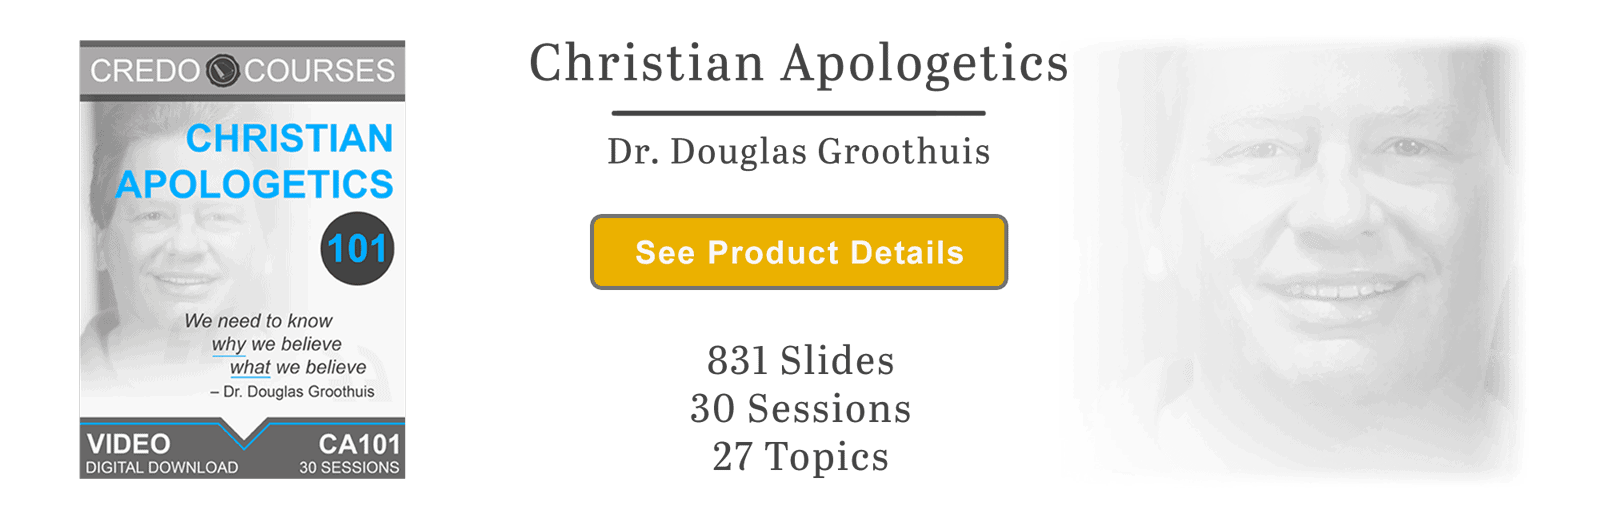 Christian Apologetics by Douglas Groothuis